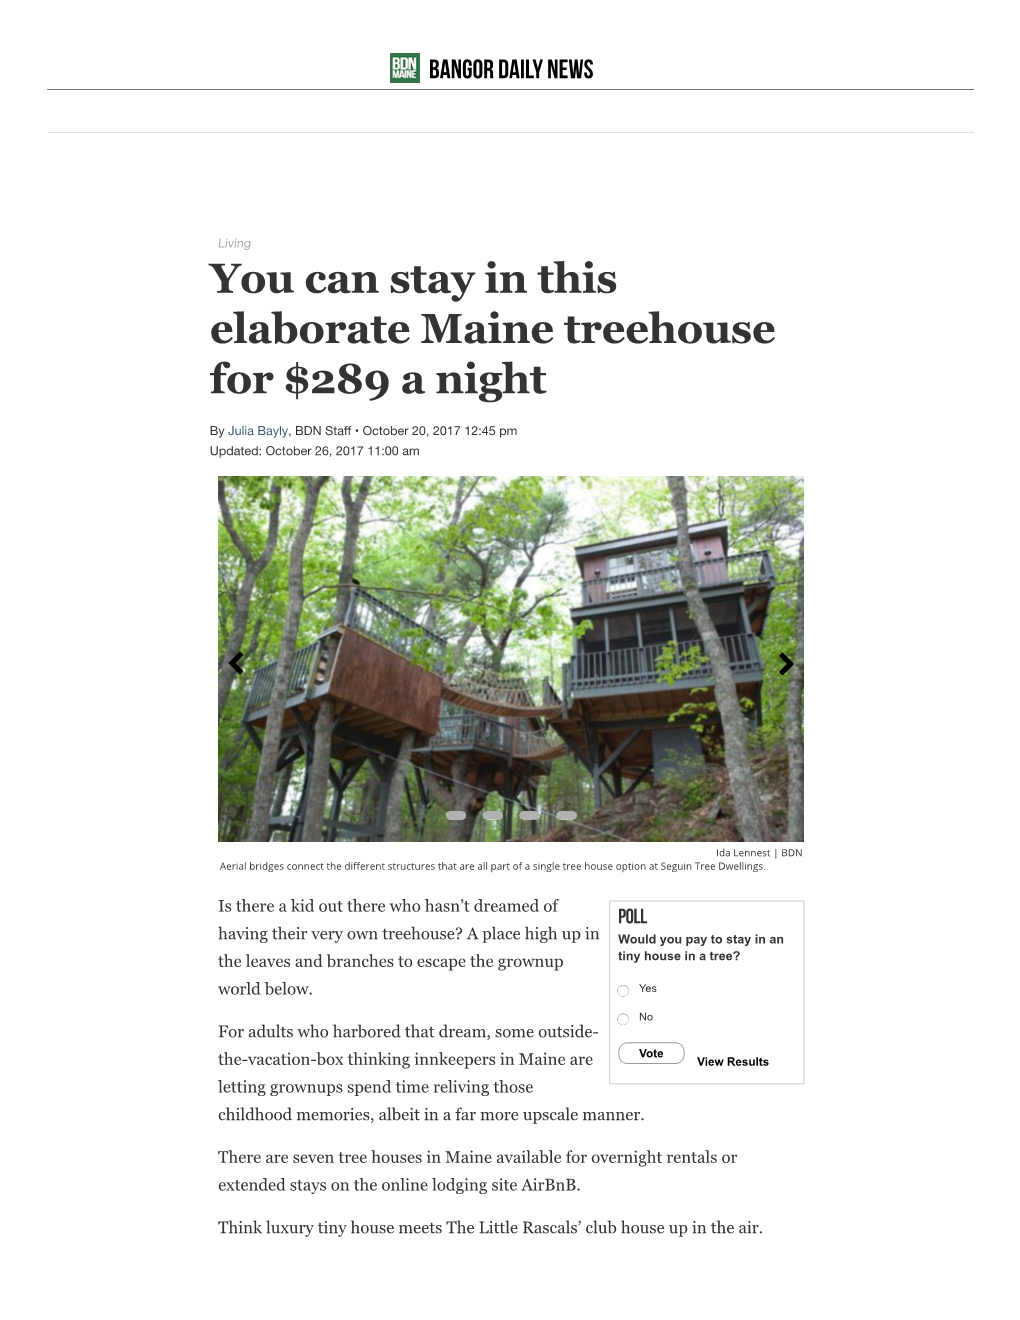 You Can Stay in This Elaborate Maine Treehouse for $289 a Night